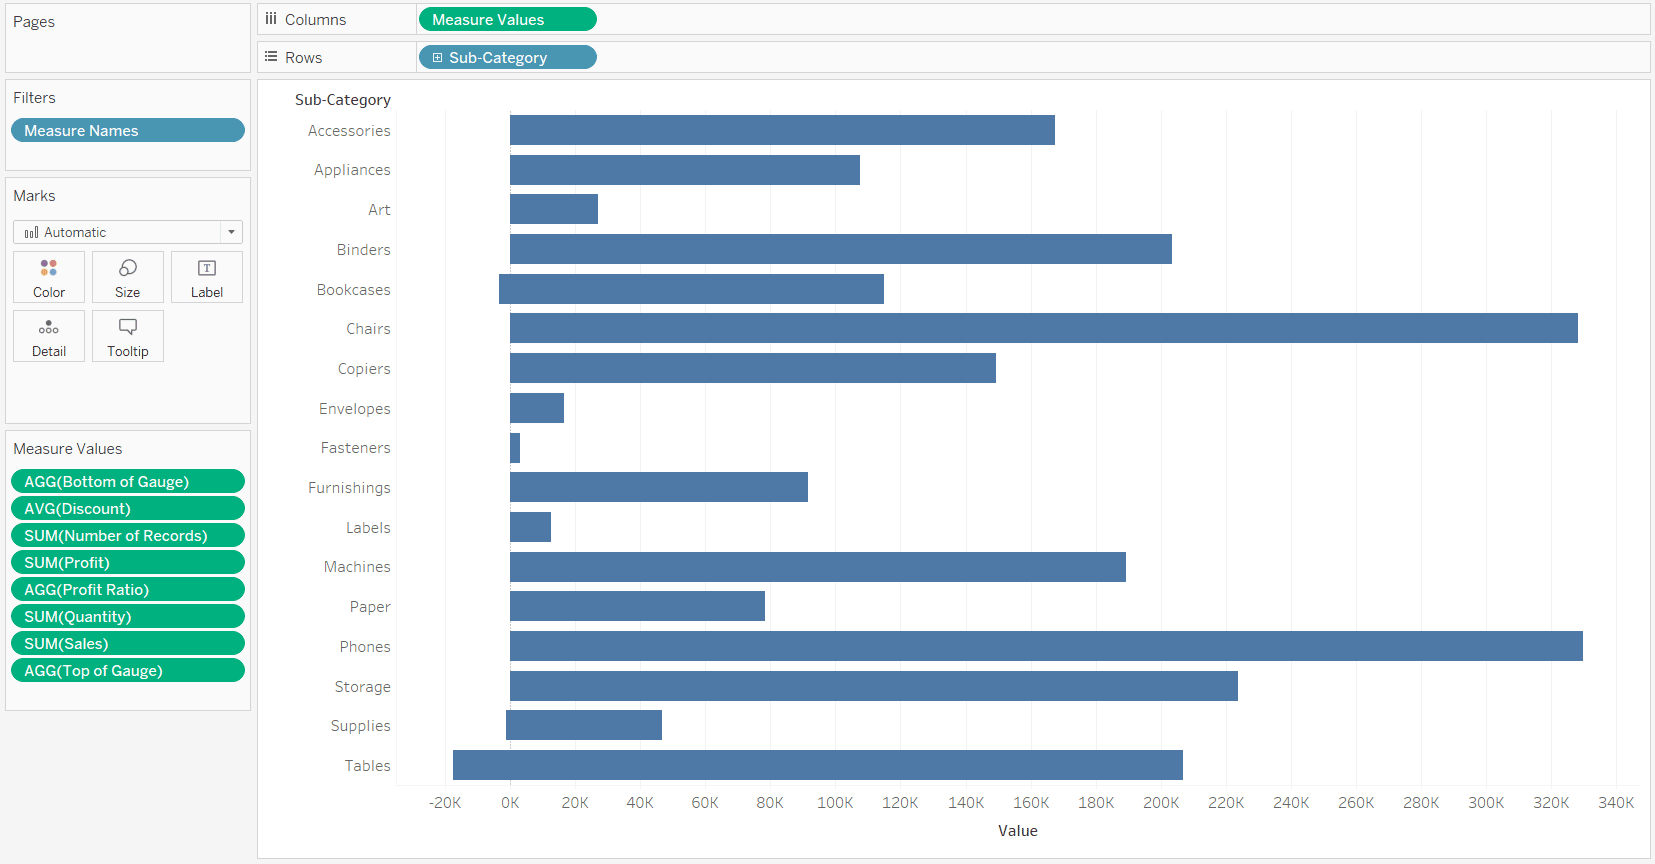 Measure Values by Sub-Category Bar Chart in Tableau